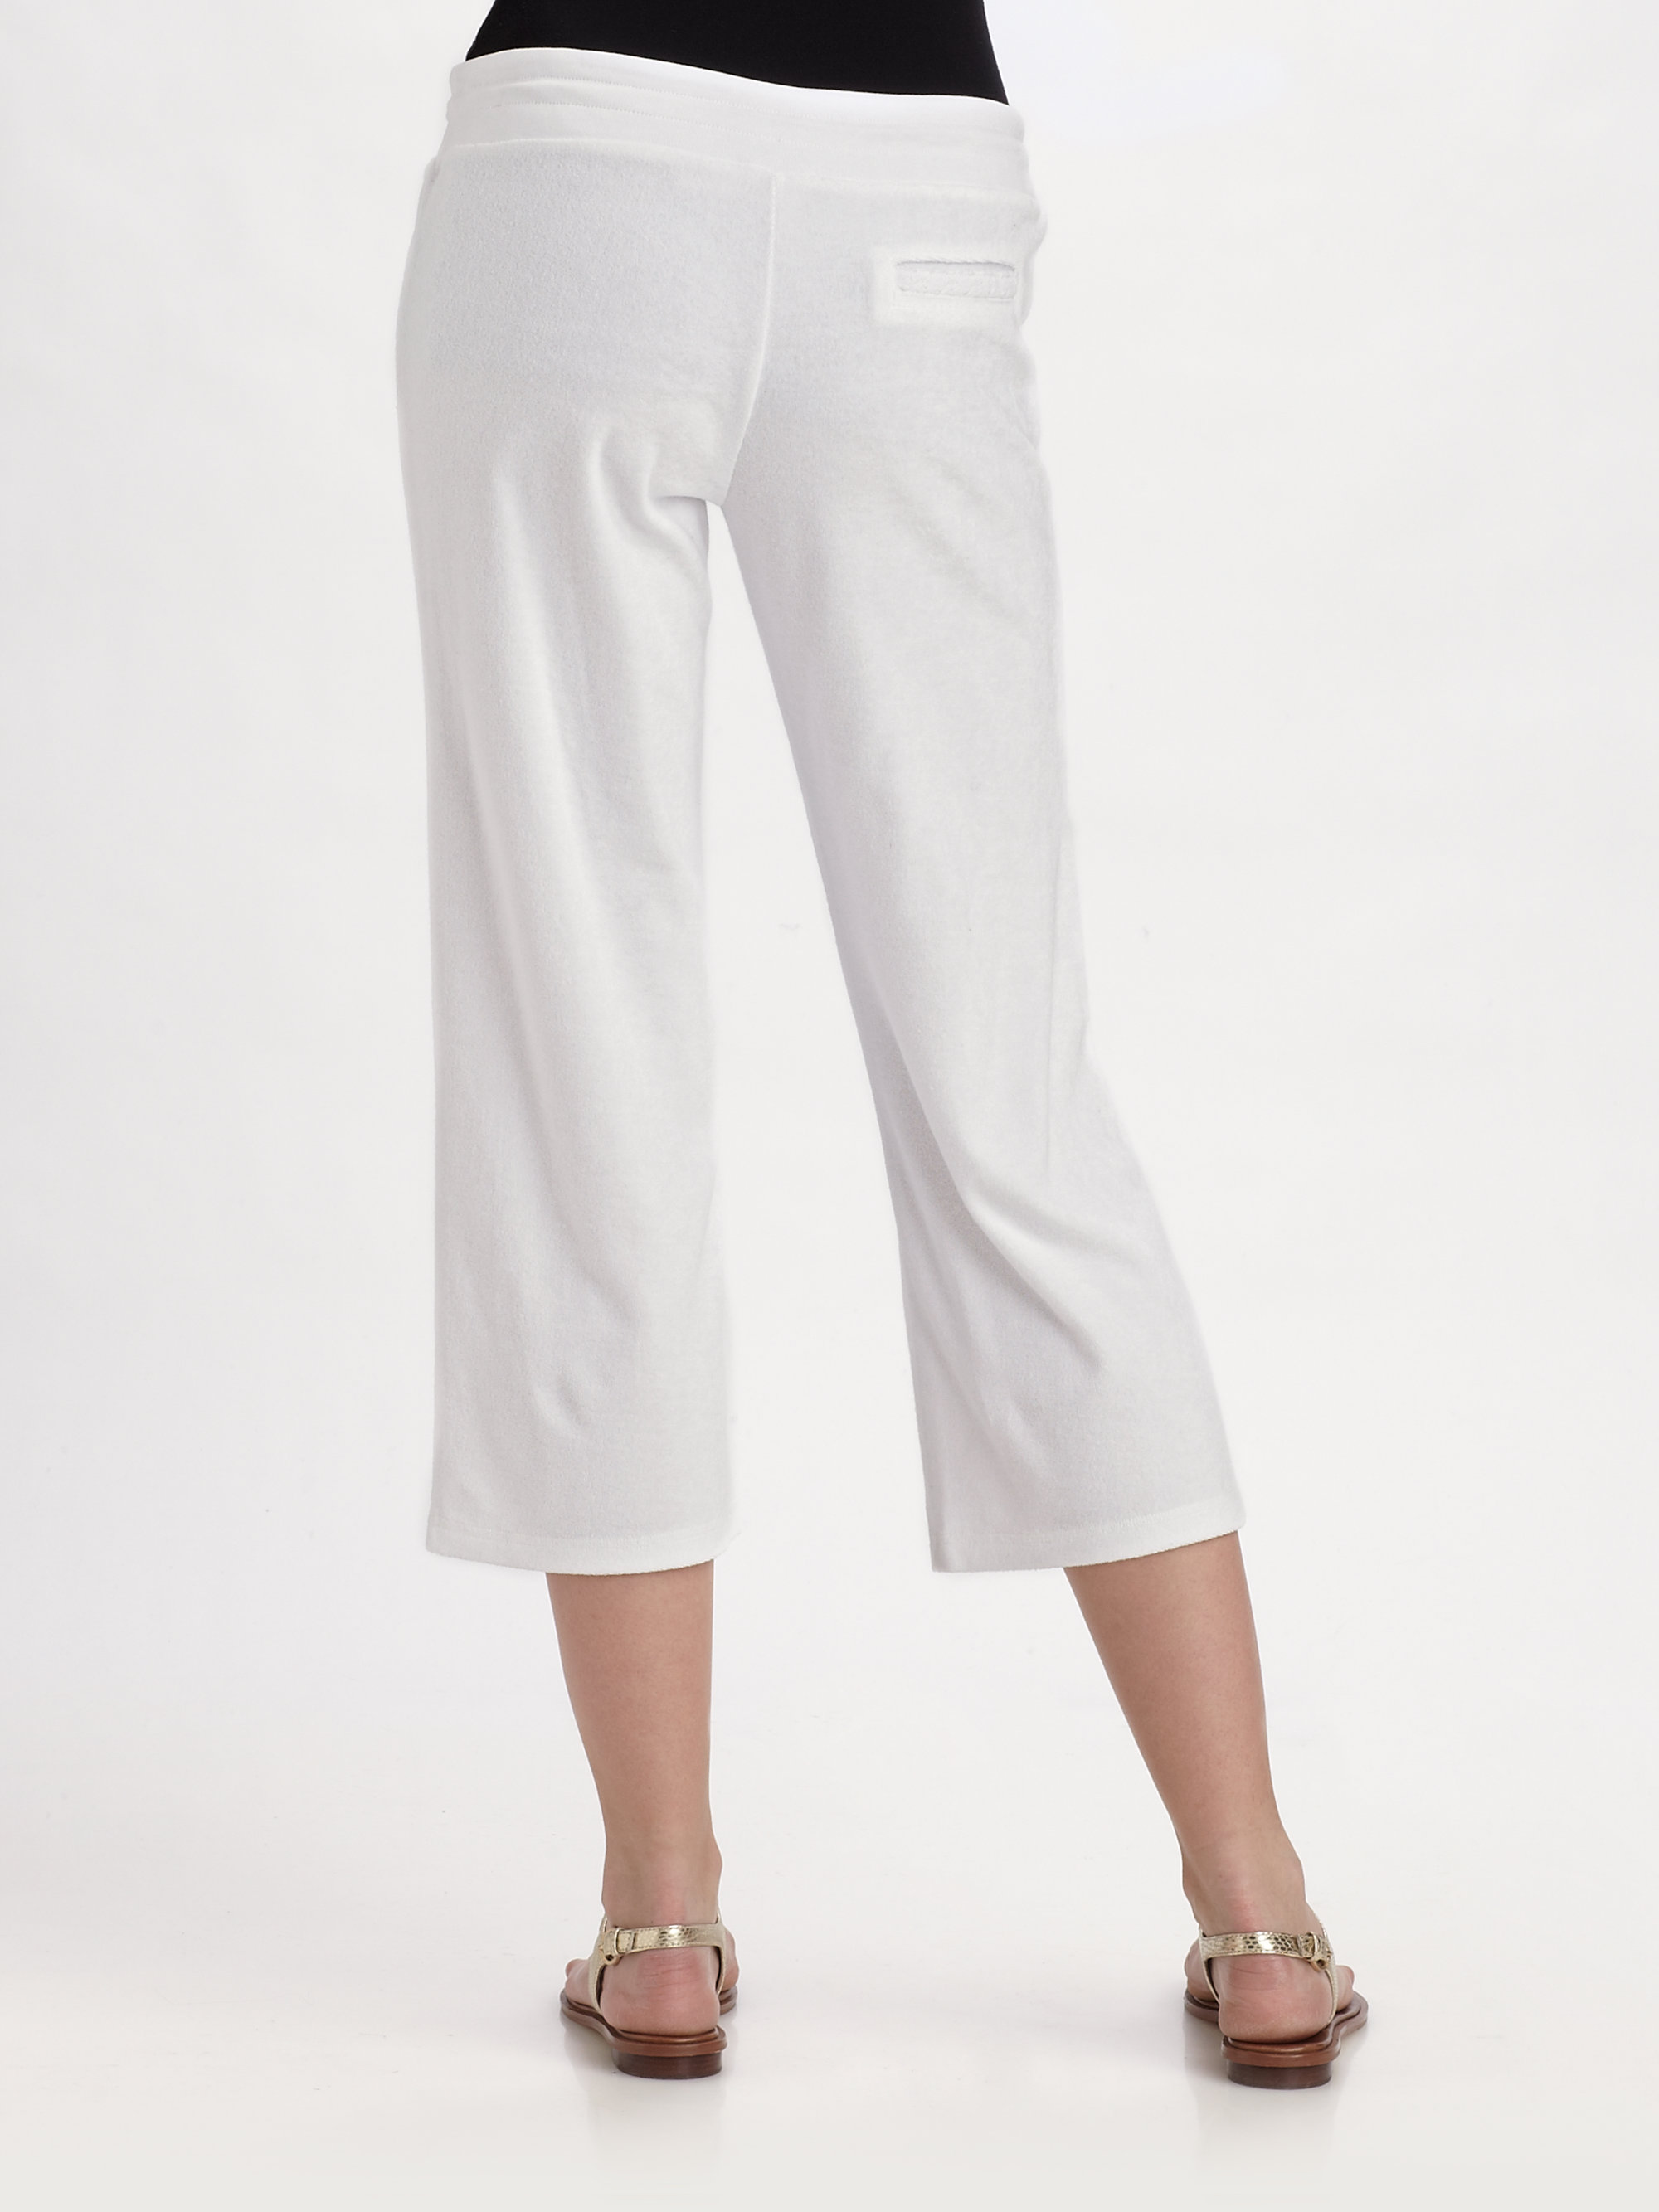 Juicy couture Terry Cropped Pants in White | Lyst